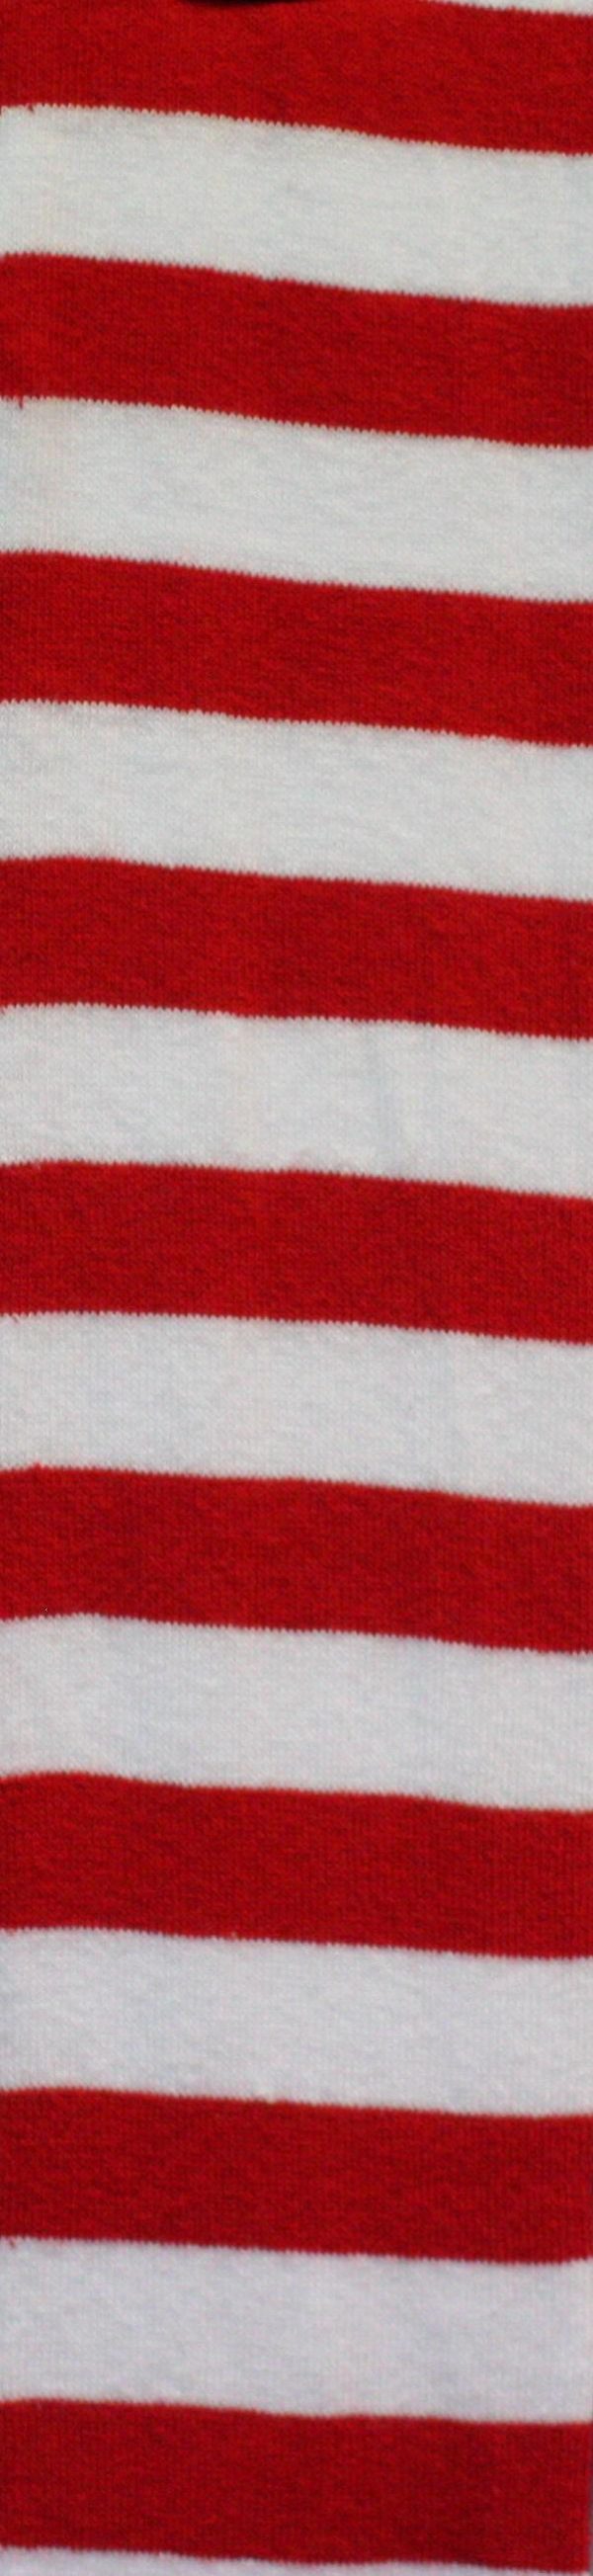 WW4166-RED AND WHITE STRIPED OVER THE KNEE SOCKS -0